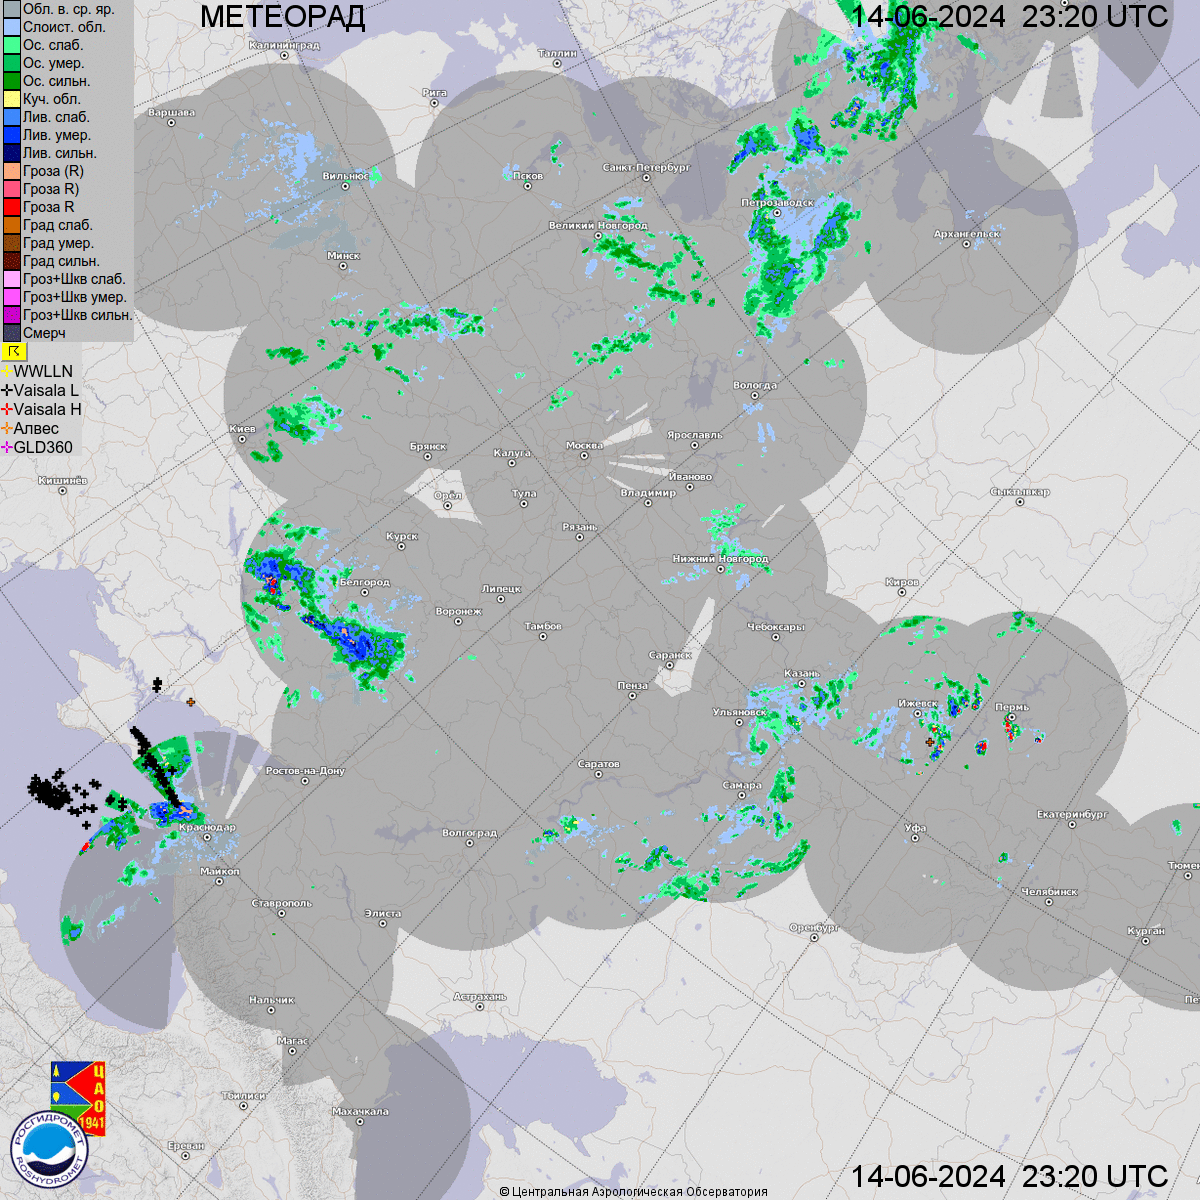 Weather phenomena during the recent 3 hours (on the basis of radar observations)